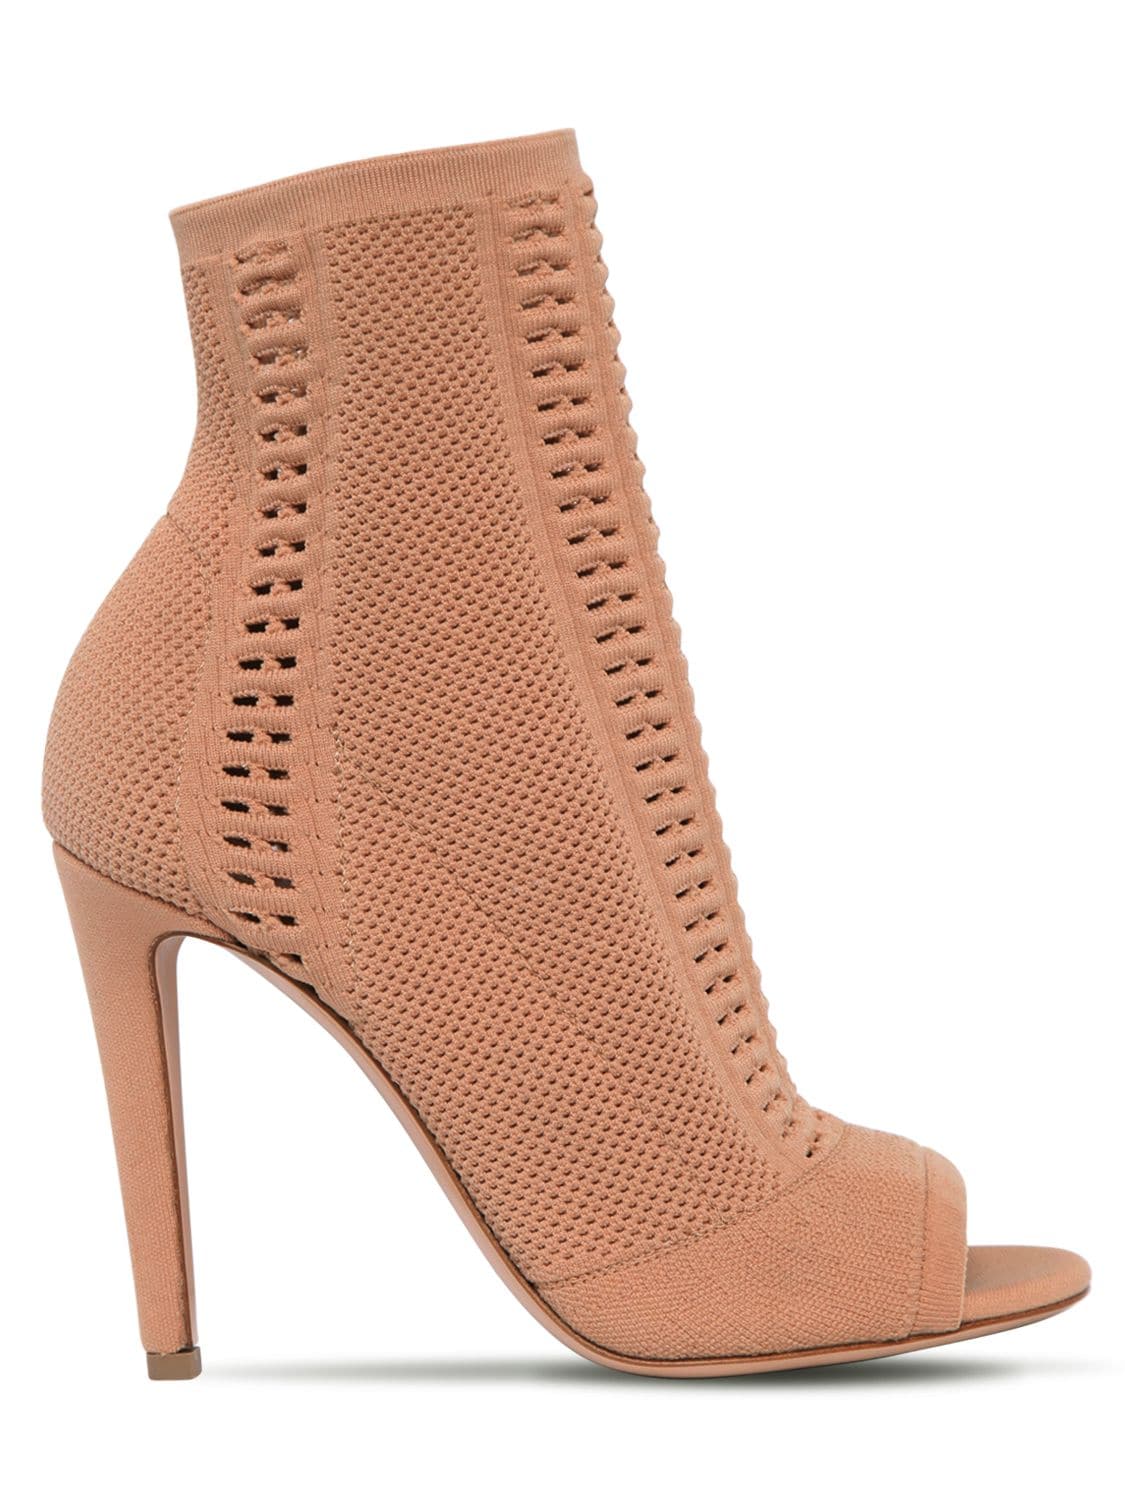 Gianvito Rossi 100mm Vires Stretch Knit Open Toe Boots In Nude